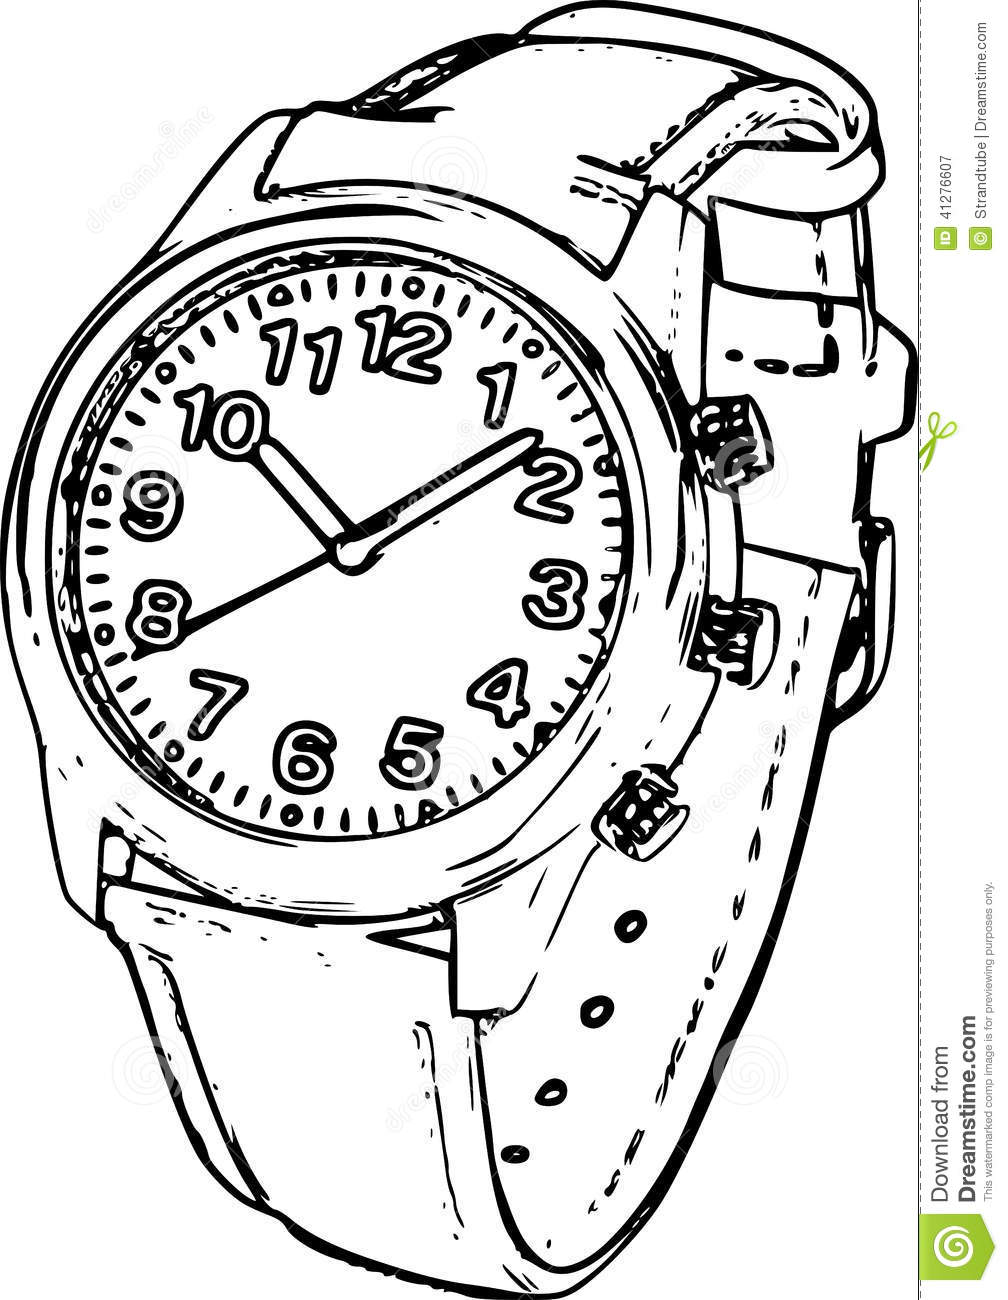 Royalty Free Stock Photography  Wrist Watch Sketch  Image  41276607